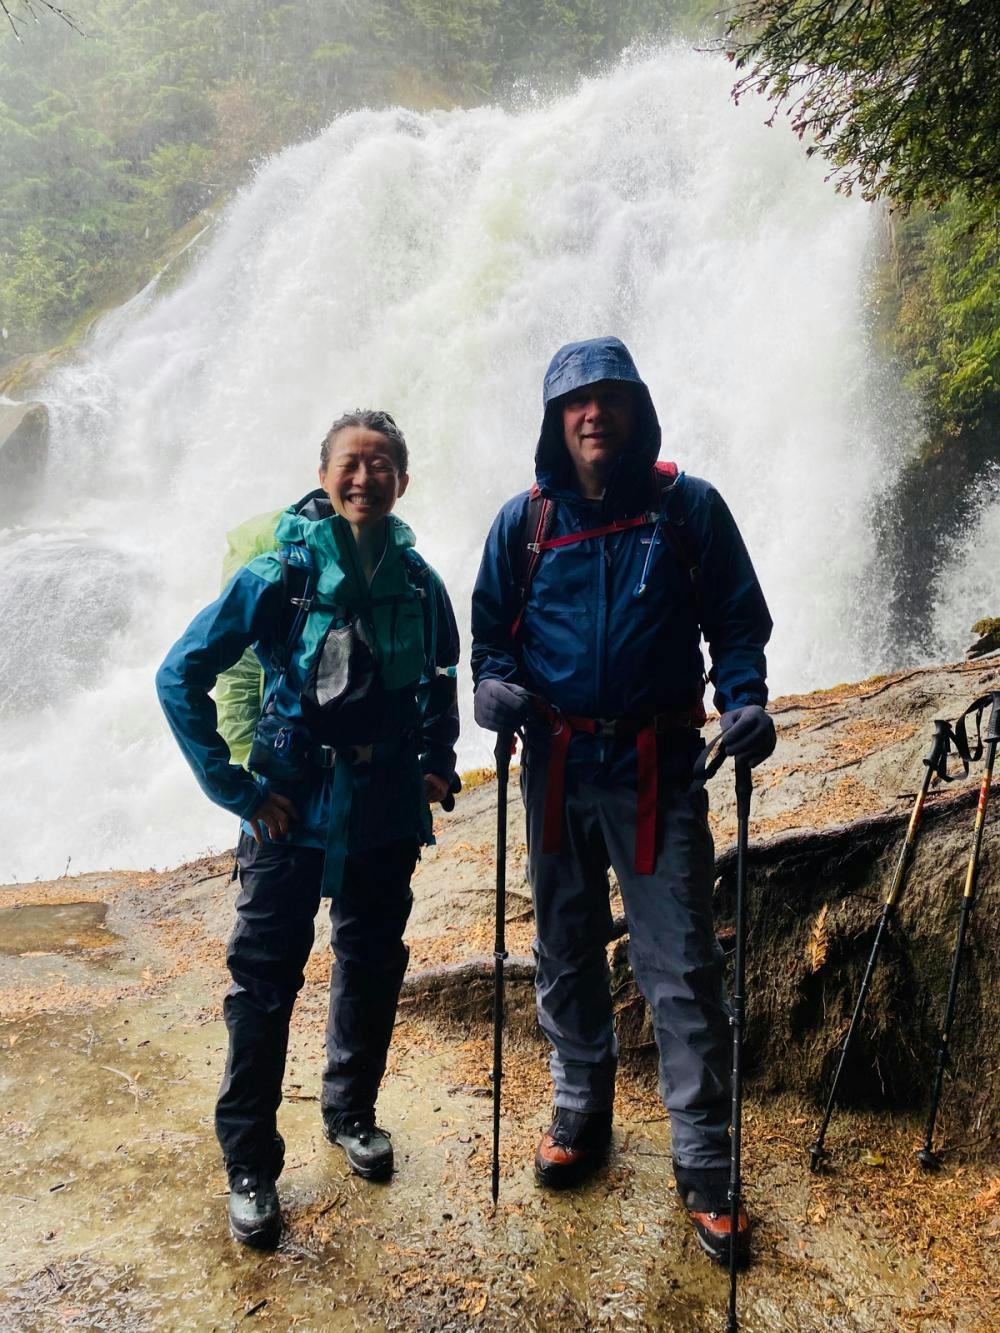 Doug and his wife smiling on a hike in front of a waterfall